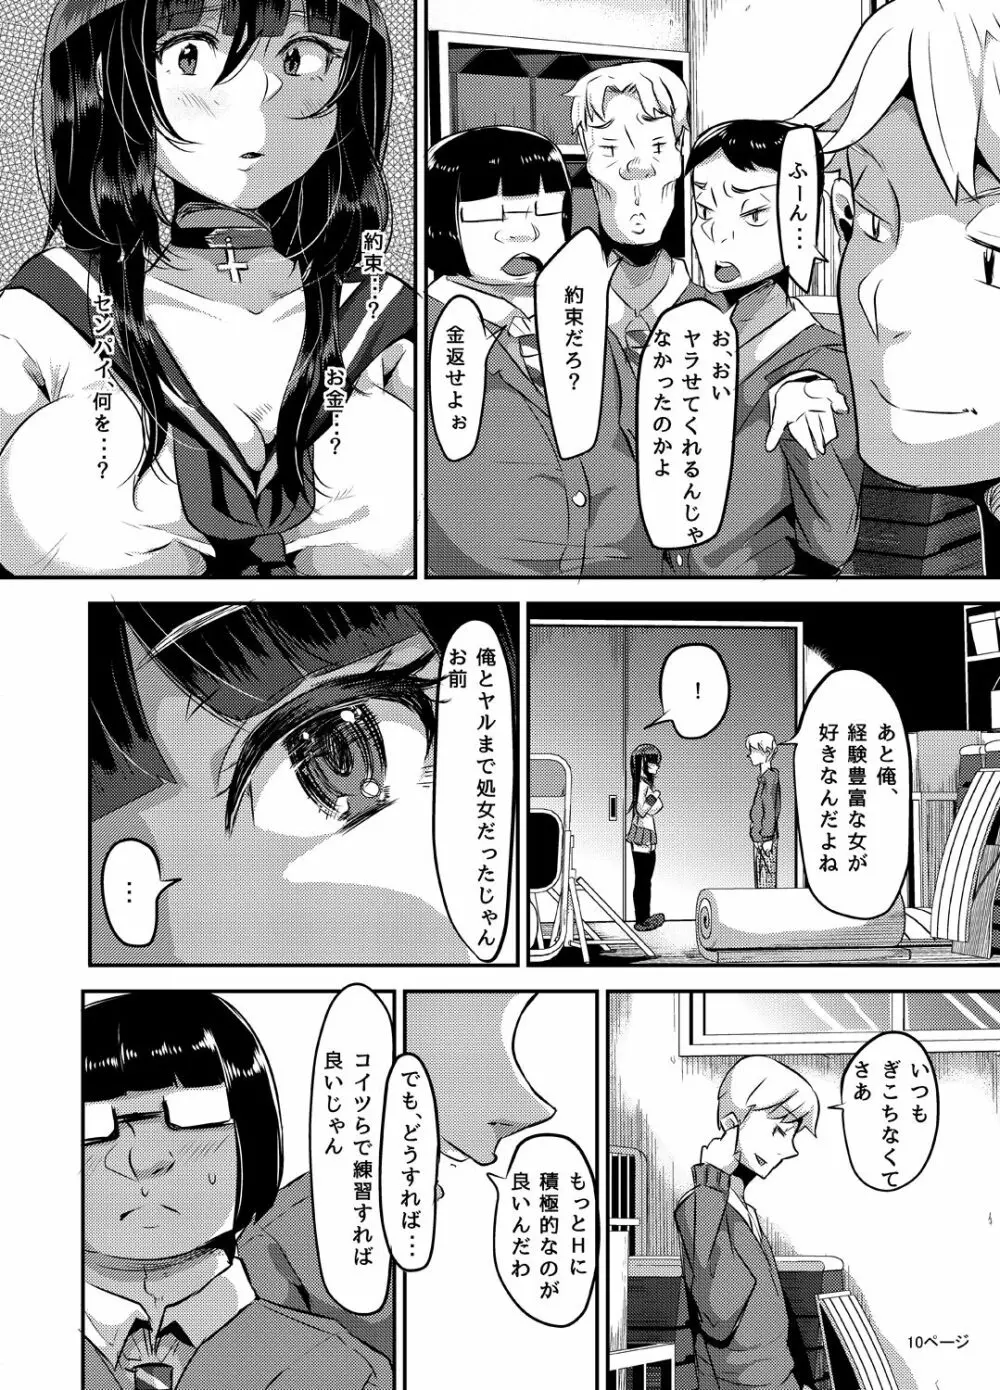 好き好き好き好き好き好き好き好き ver.3 - page11